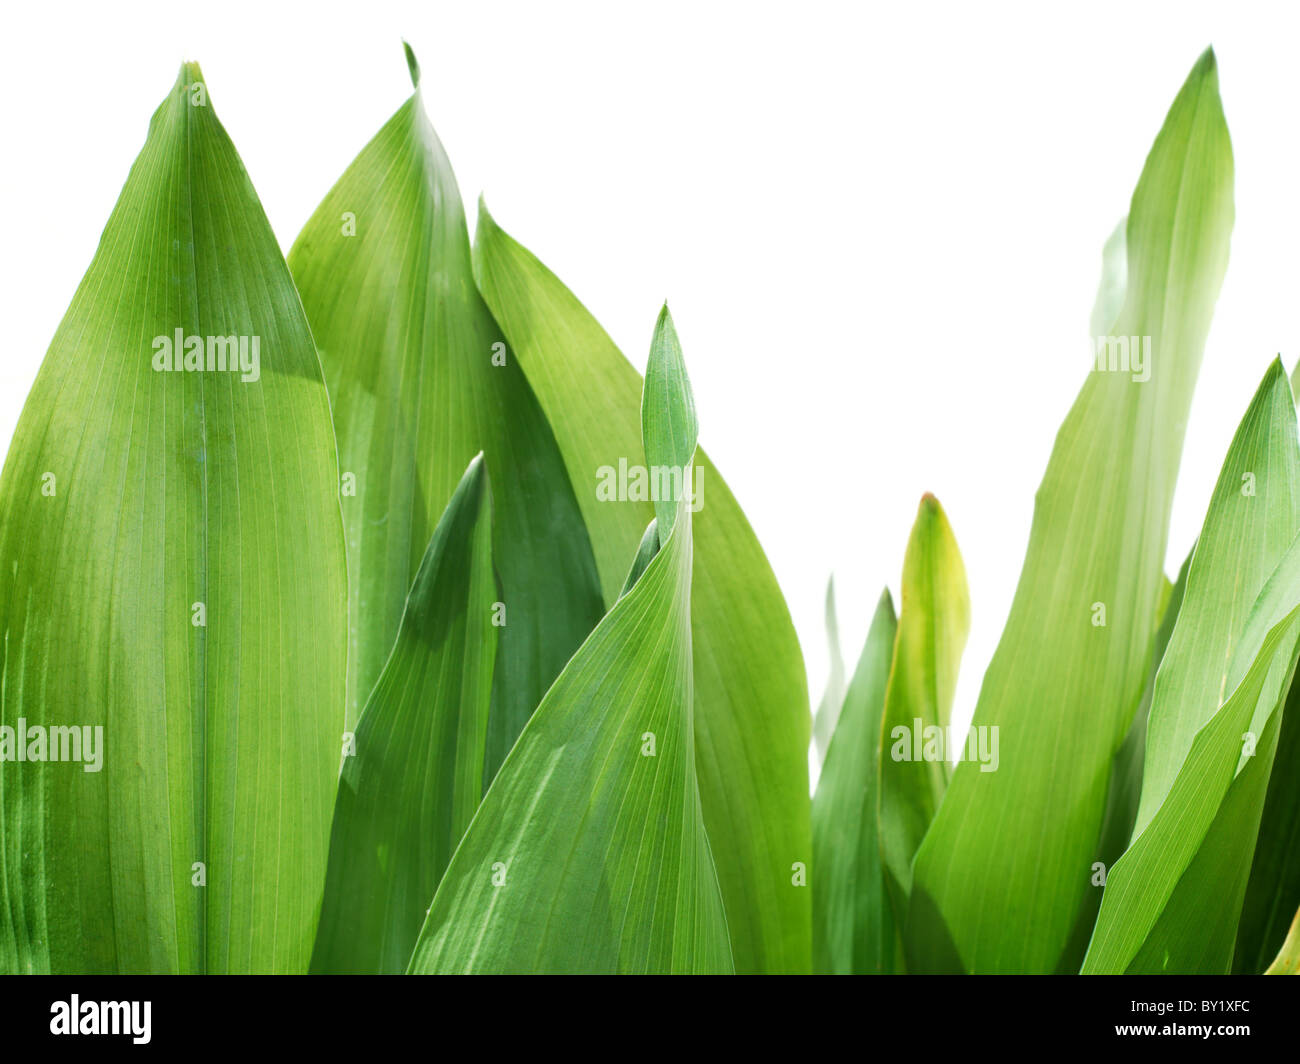 Bright green leaves photographed on white background (no post work isolation) Stock Photo